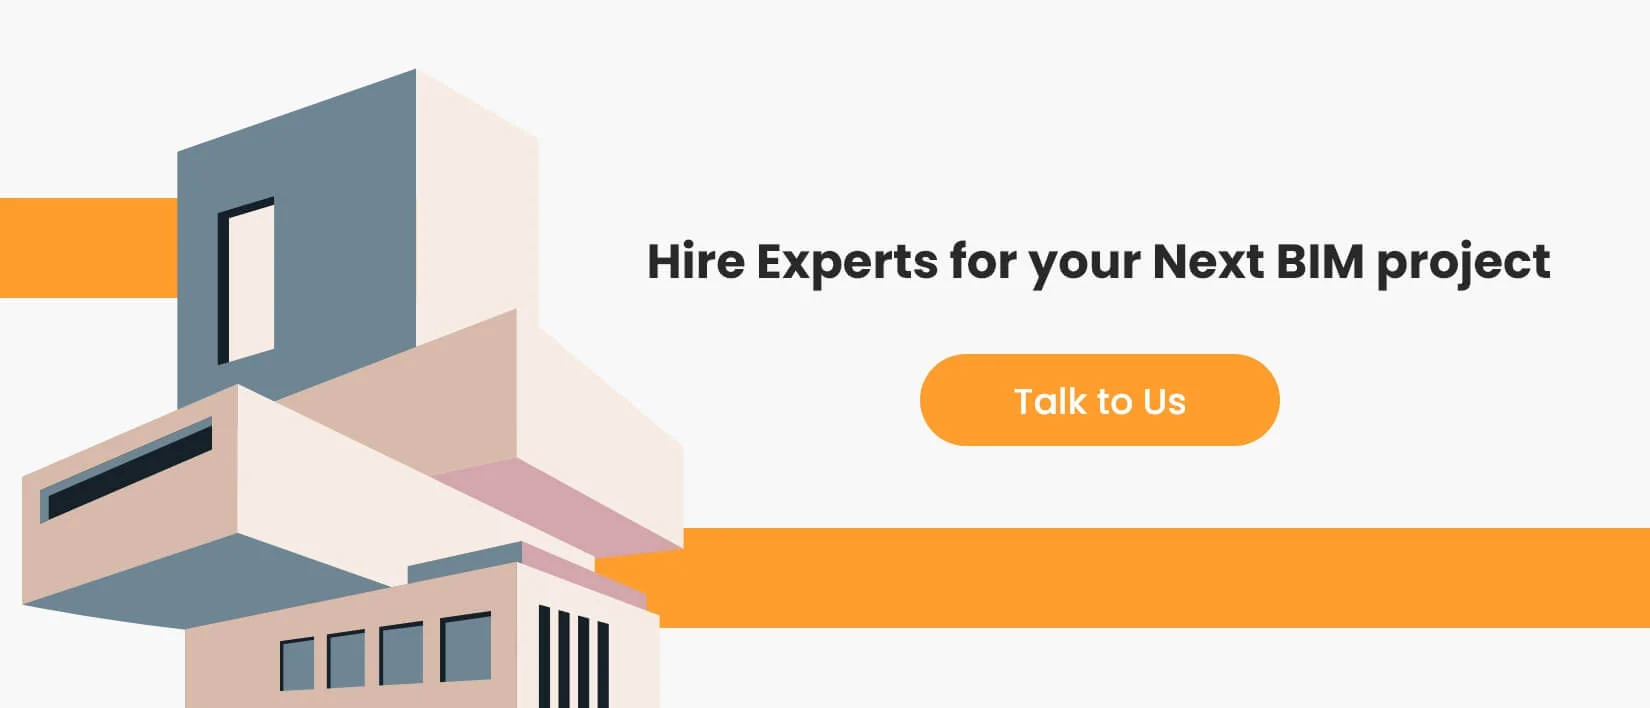 Hire Experts for your Next BIM project